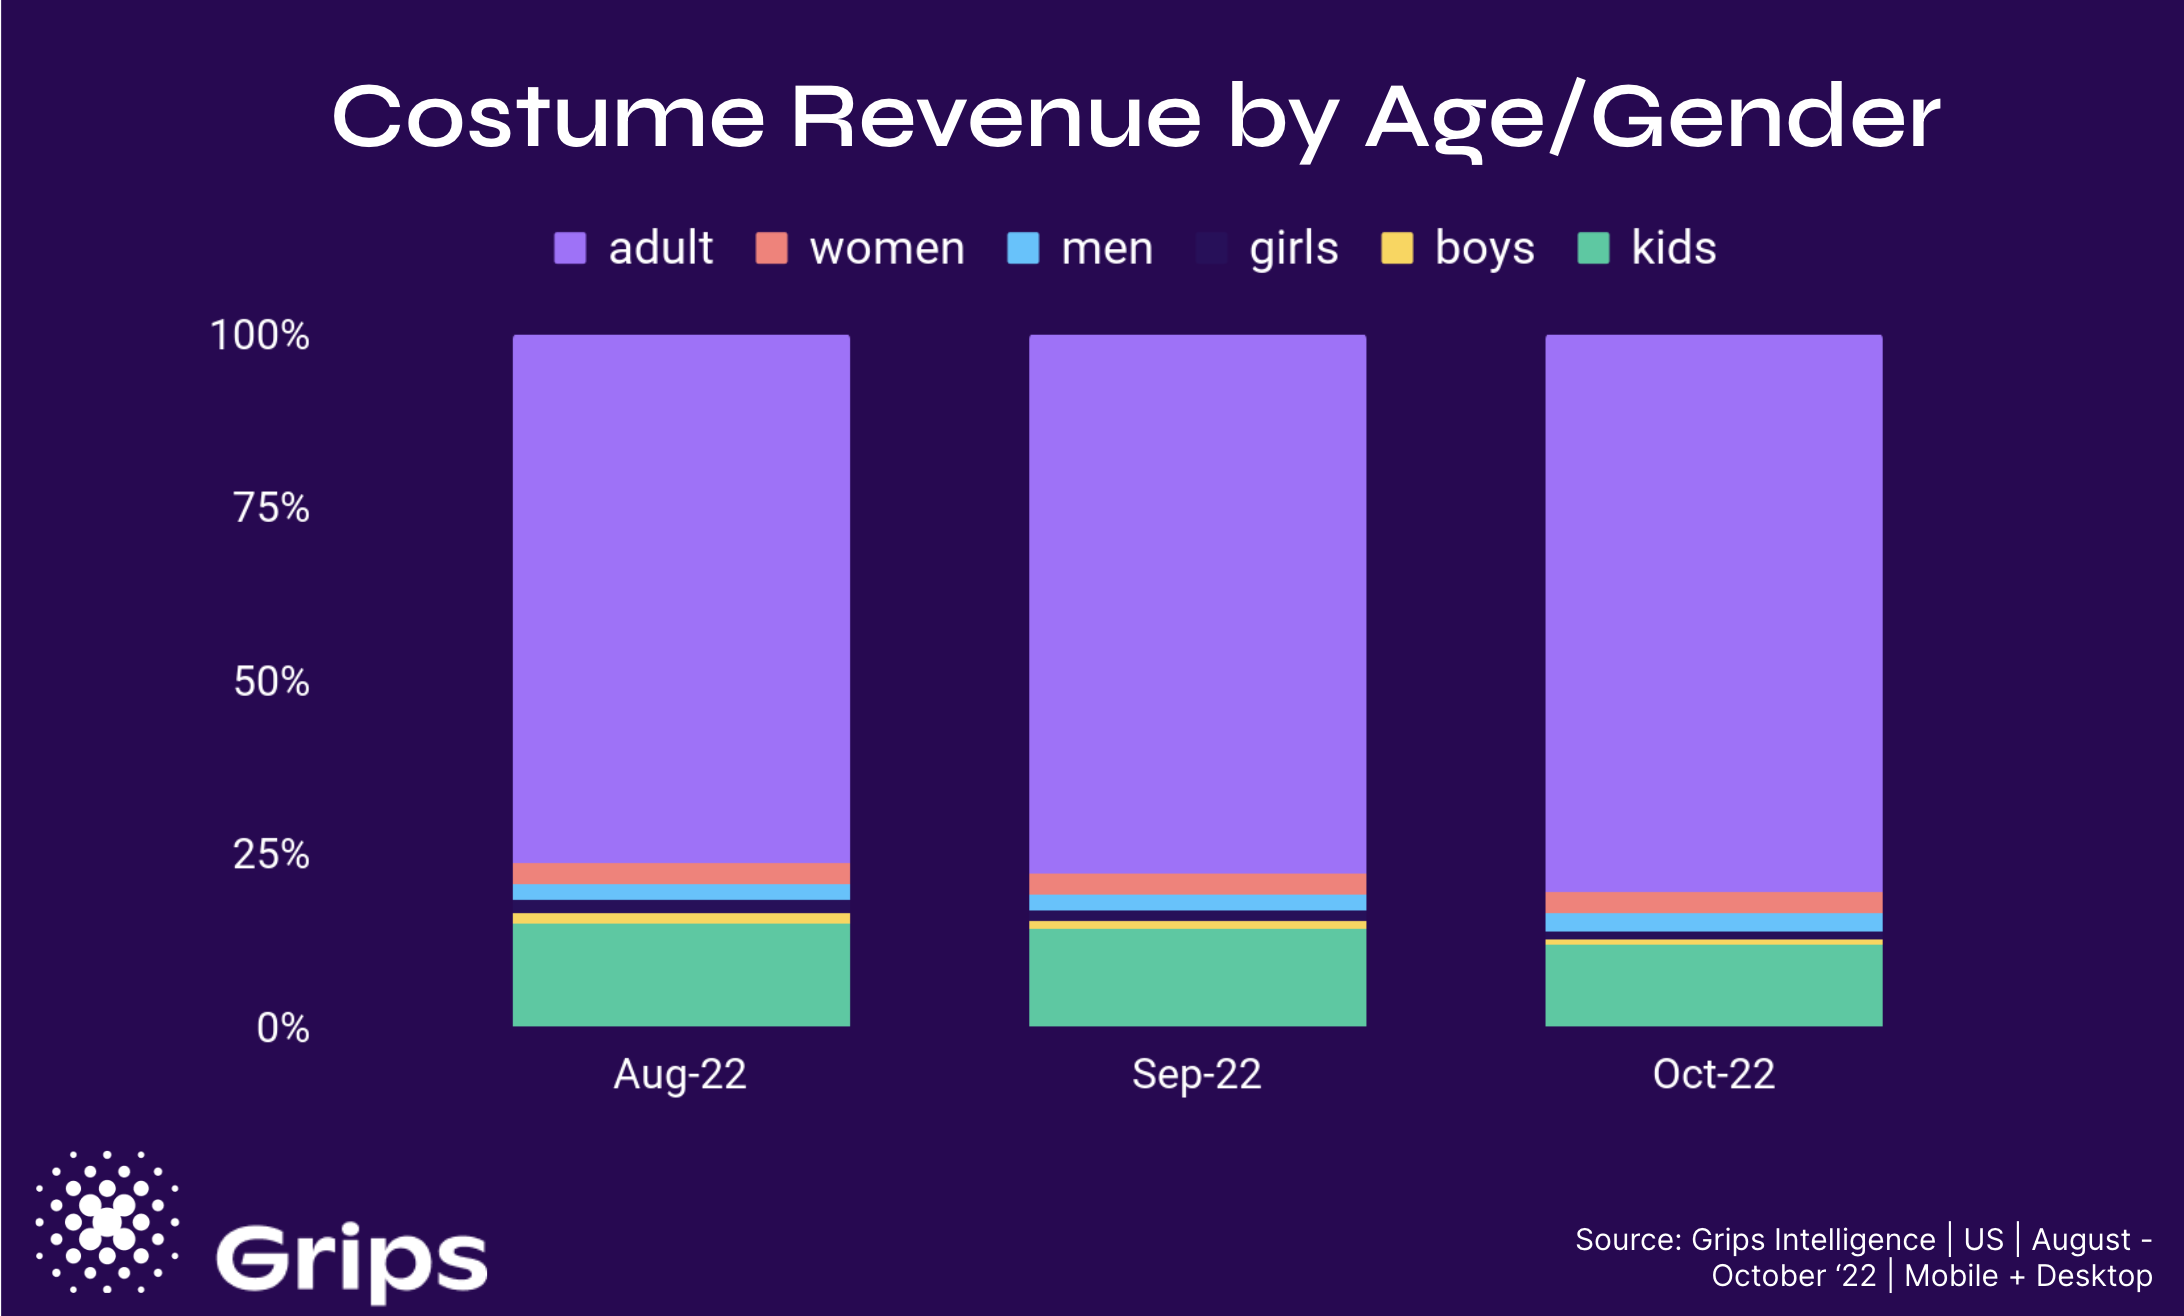 Online sales of costumes is dominated by costumes for adults